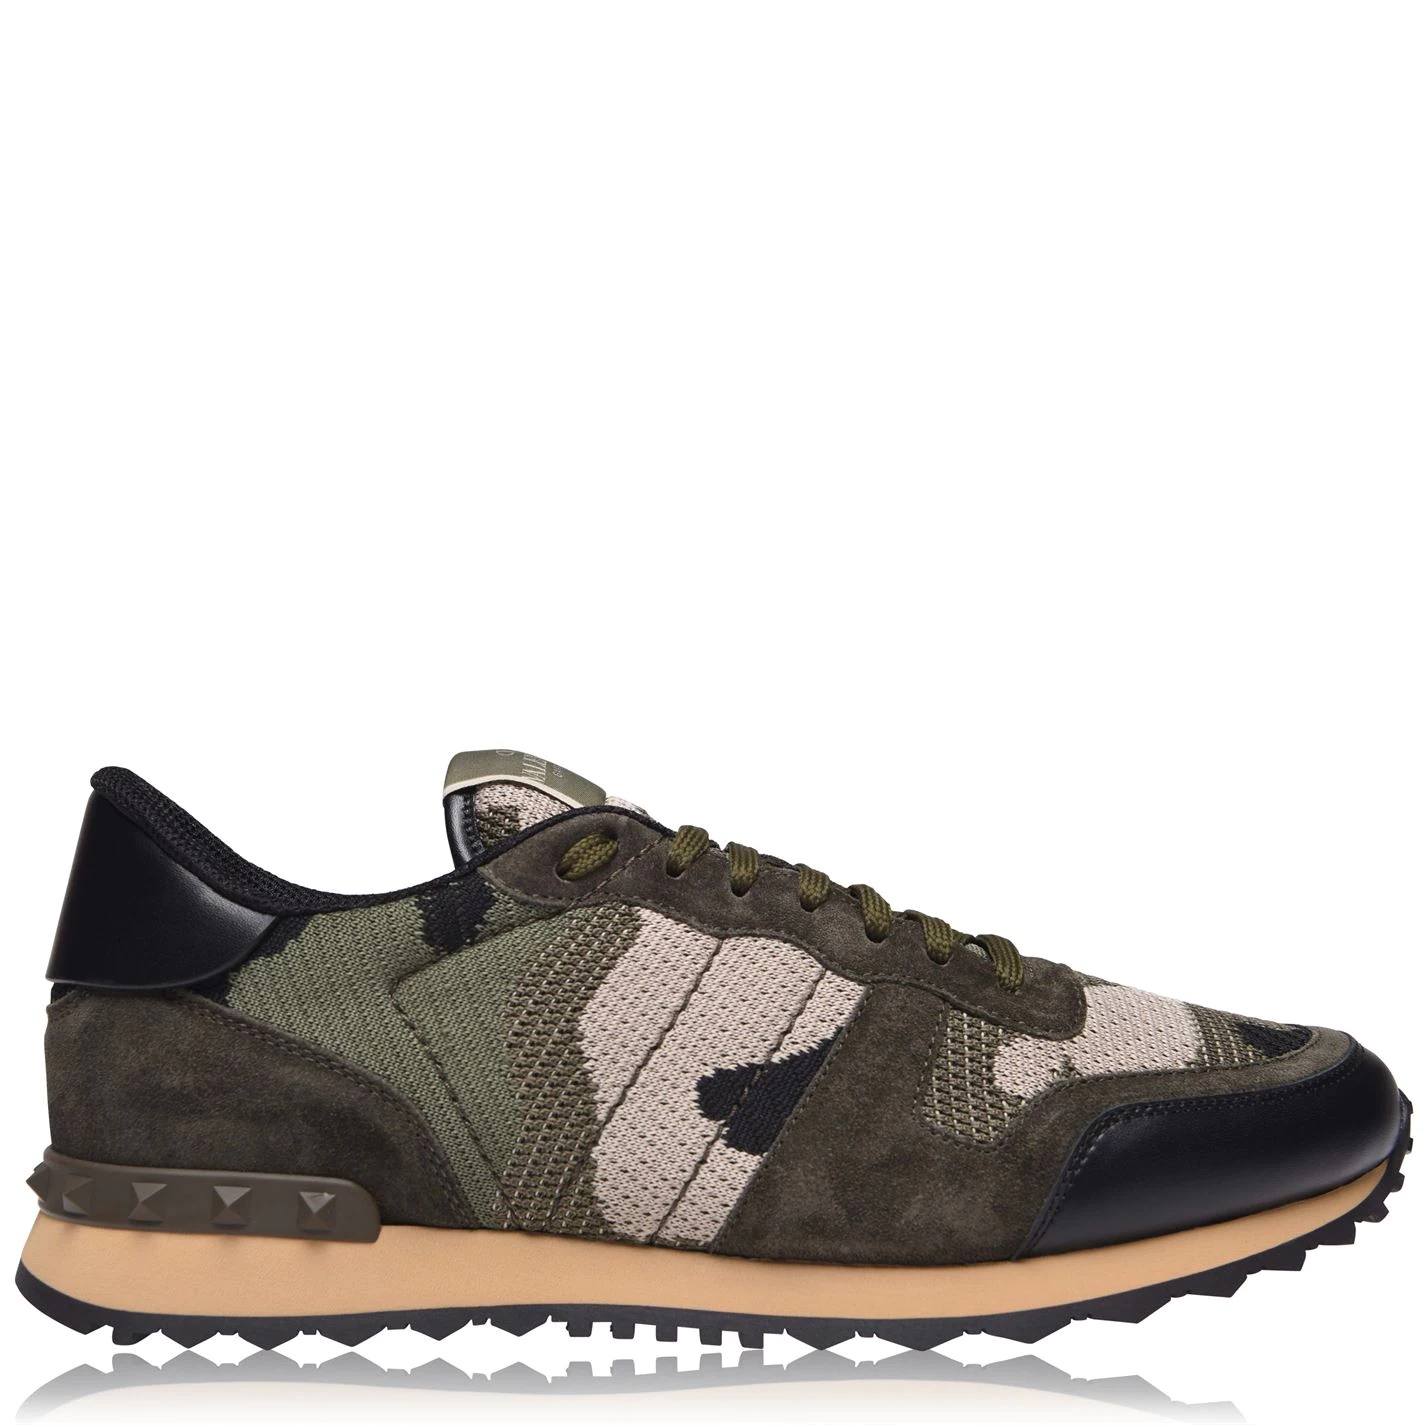 MESH CAMOUFLAGE ROCKRUNNER TRAINERS - 1